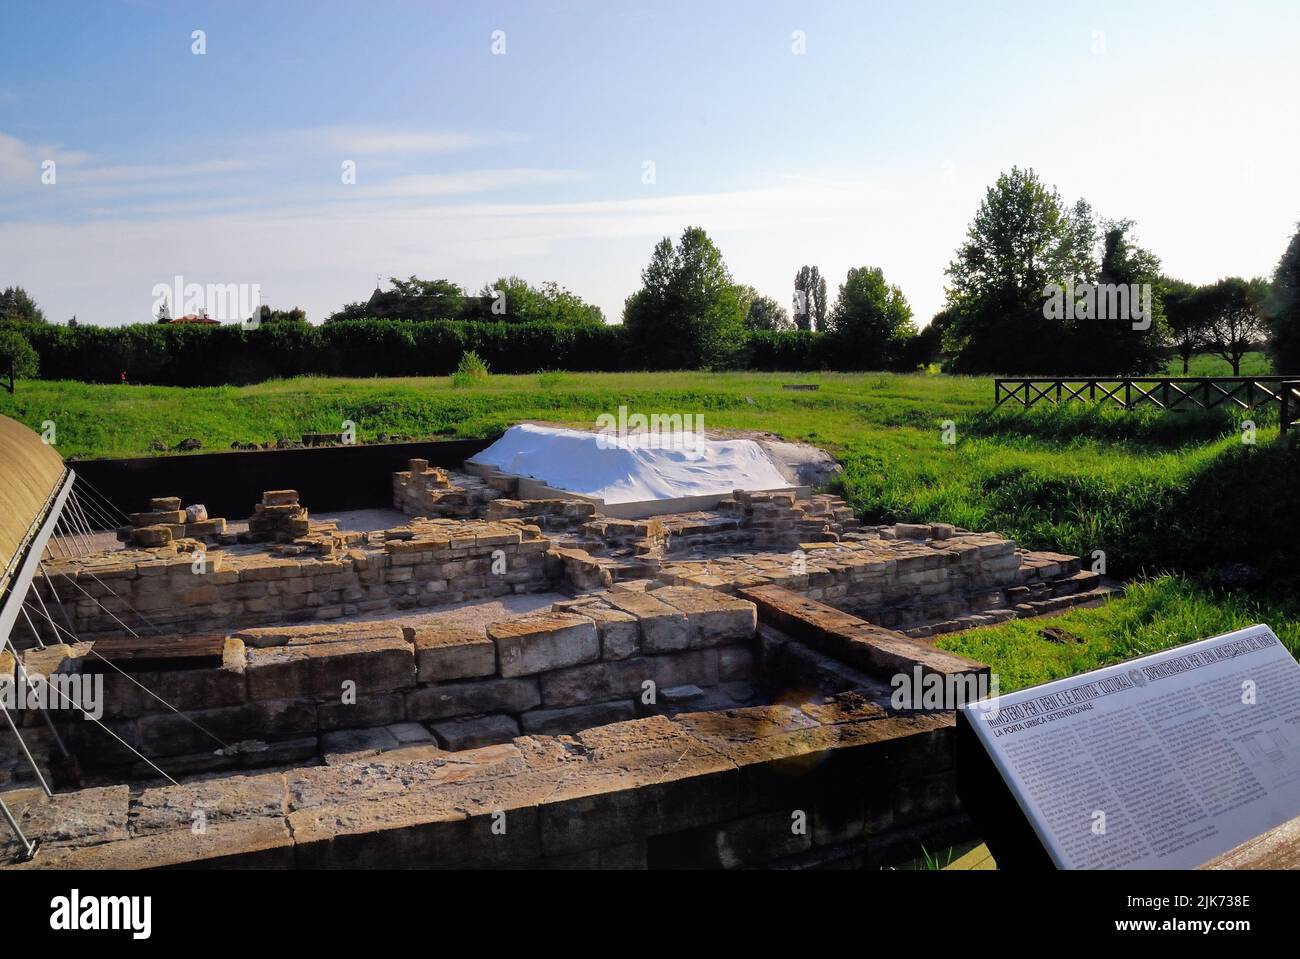 The archaeological area of AAltinum. Altinum  was an ancient town of the Veneti, close to the mainland shore of the Lagoon of Venice. It was also close to the mouths of the rivers Dese, Zero and Sile. A flourishing port and trading centre during the Roman period, it was destroyed by Attila in 452. Stock Photo